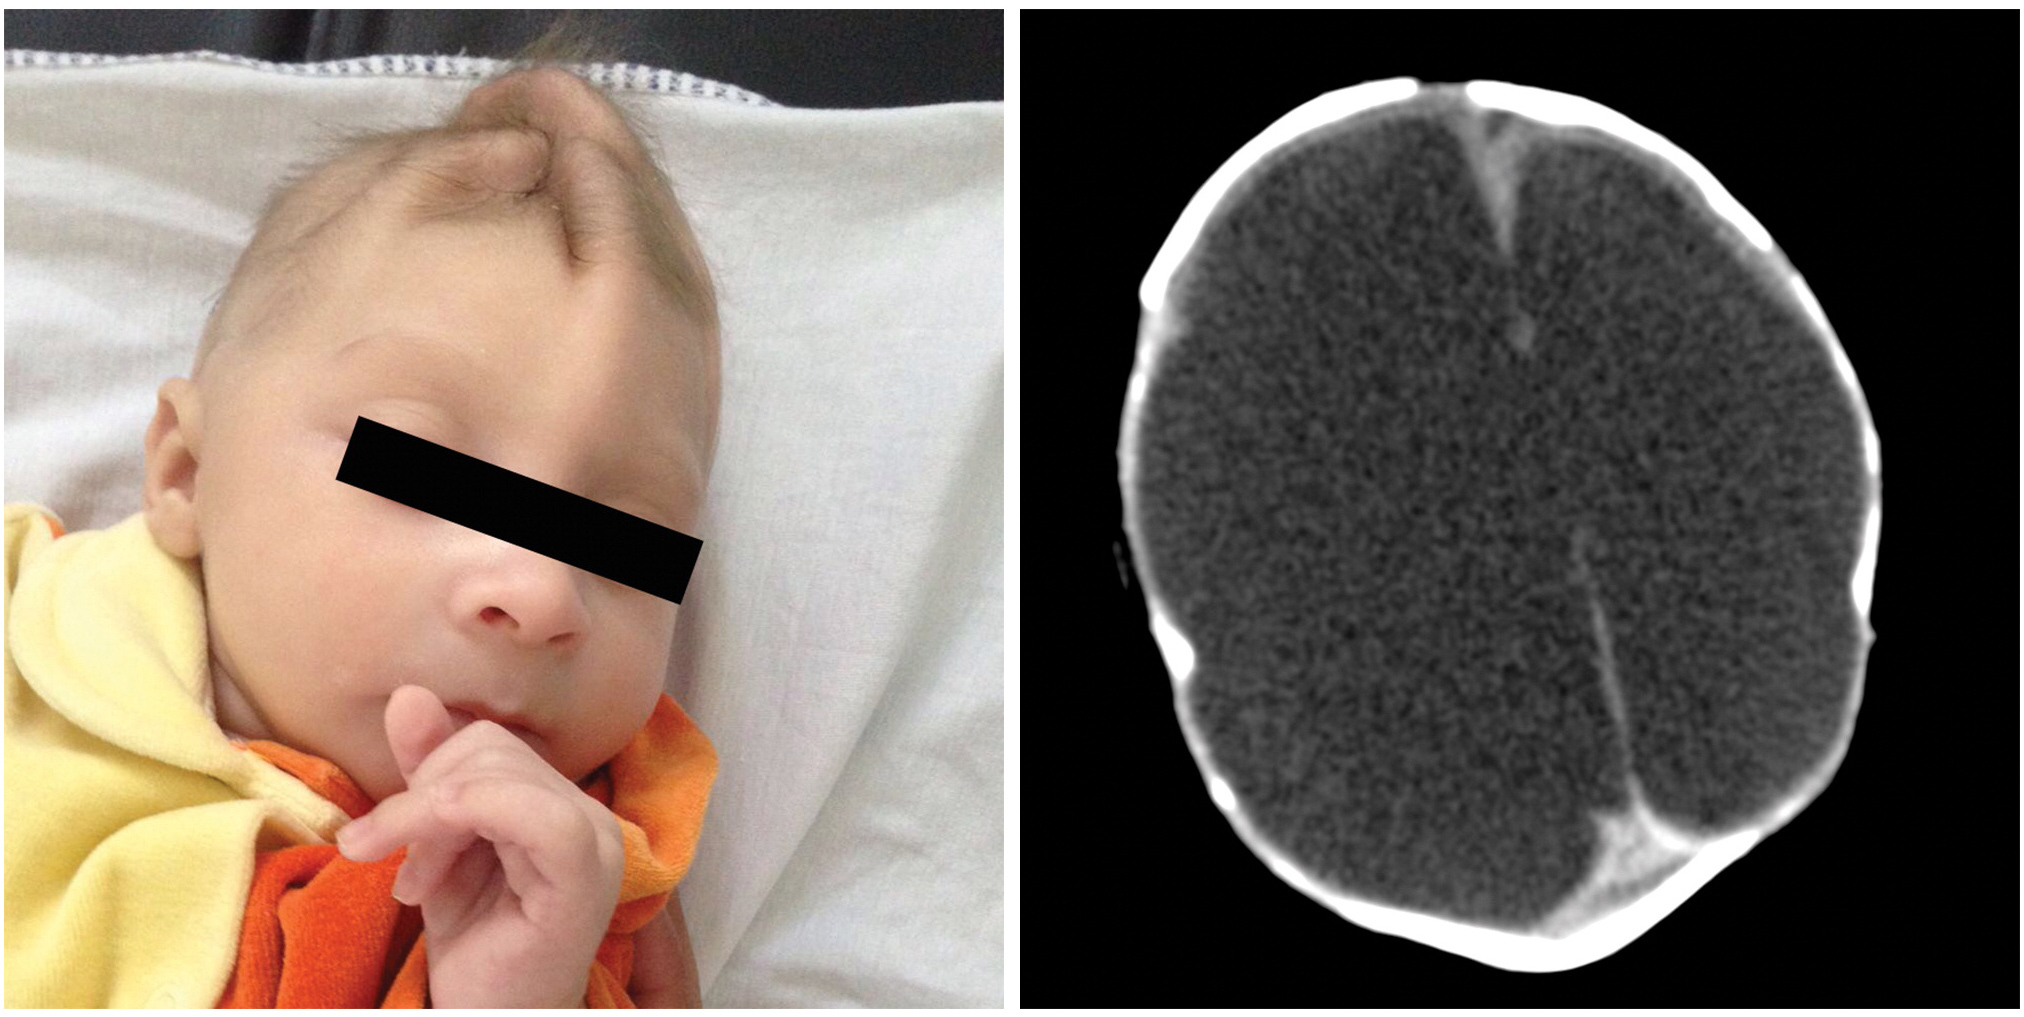 This baby was born with a normal-size head. But MRI scans show the brain is filled with fluid and little brain tissue. The cortex of the brain is normally folded, but in this case, the cortex is smooth. Courtesy of the Radiological Society of North America